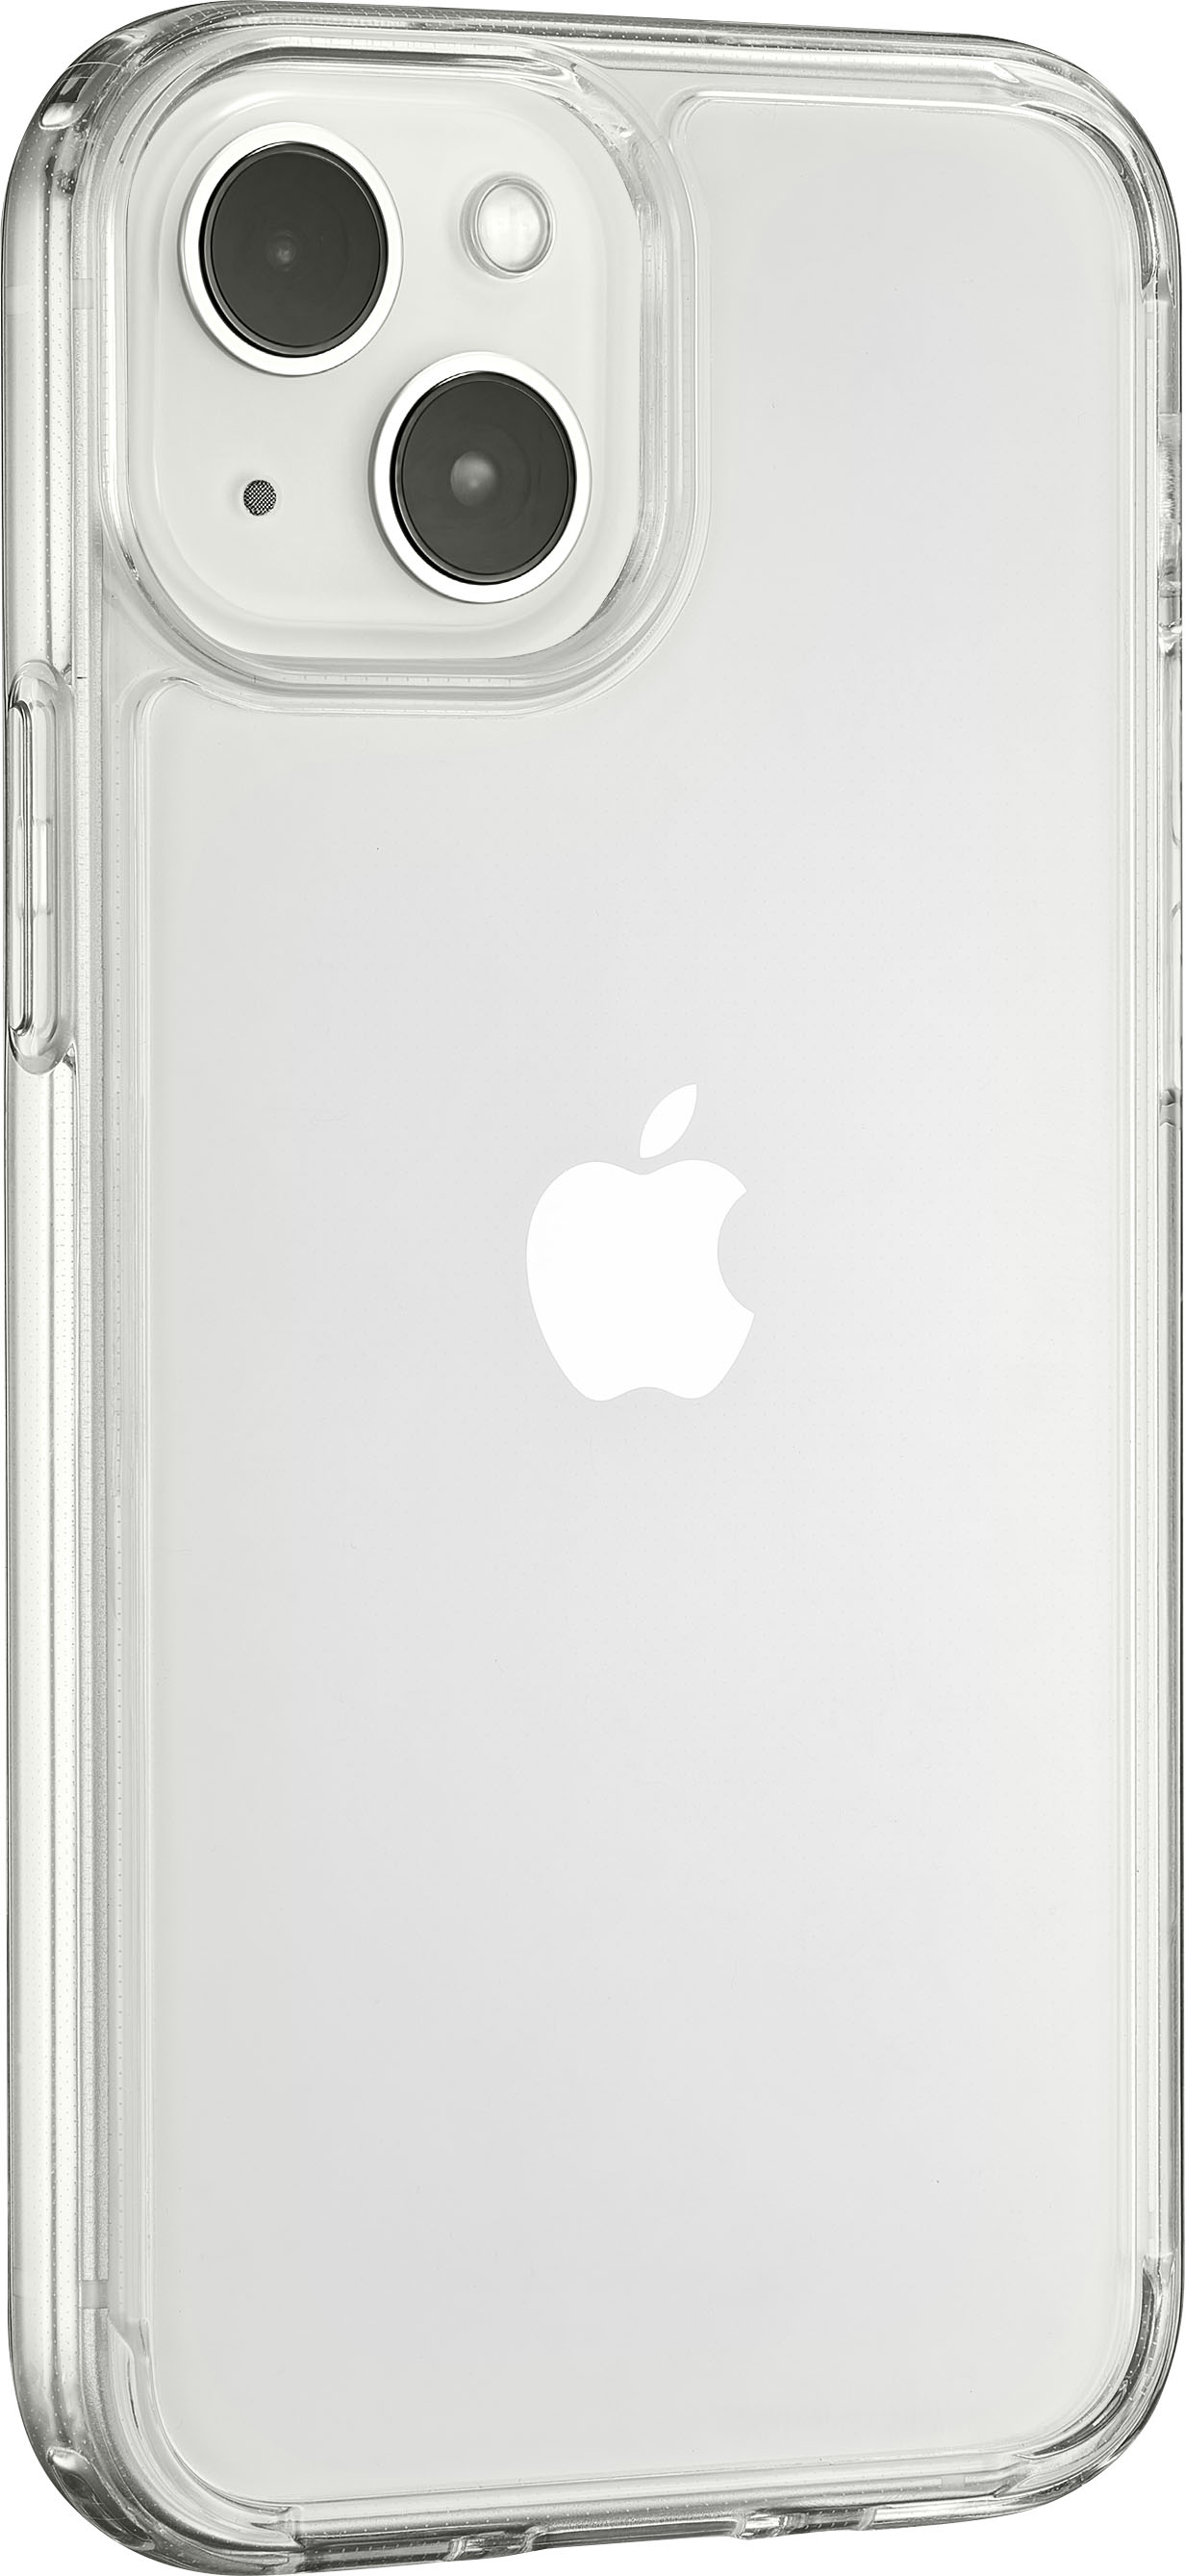 Best Buy: Insignia™ Hard Shell Case for iPhone 13 Mini and iPhone 